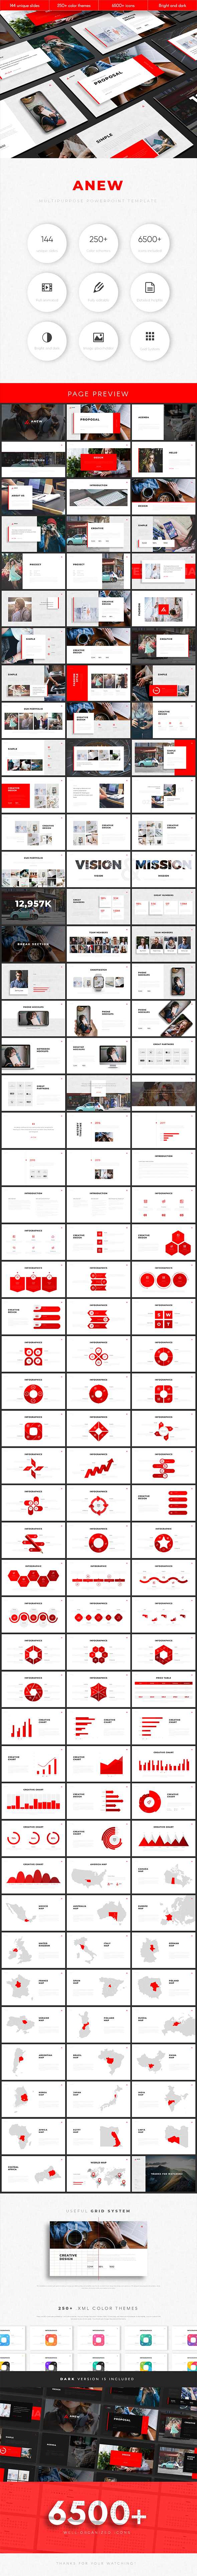 Anew Multipurpose PowerPoint Template